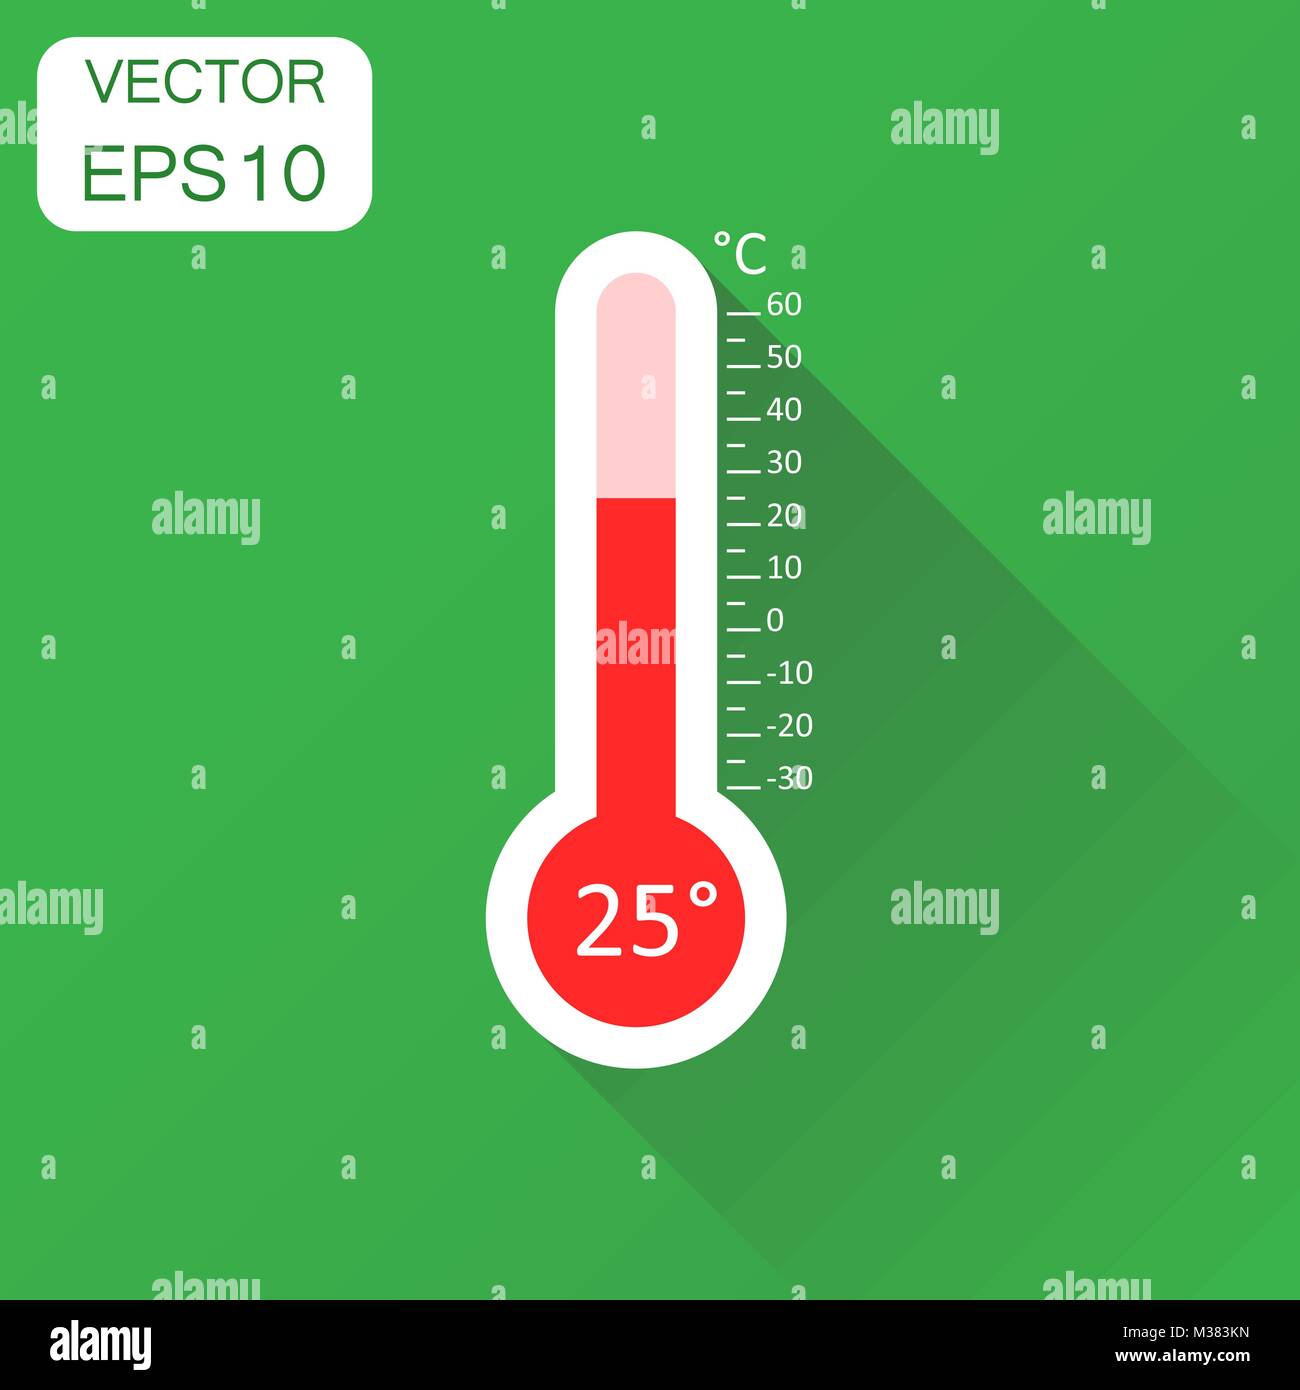 https://c8.alamy.com/comp/M383KN/thermometer-icon-business-concept-goal-pictogram-vector-illustration-M383KN.jpg